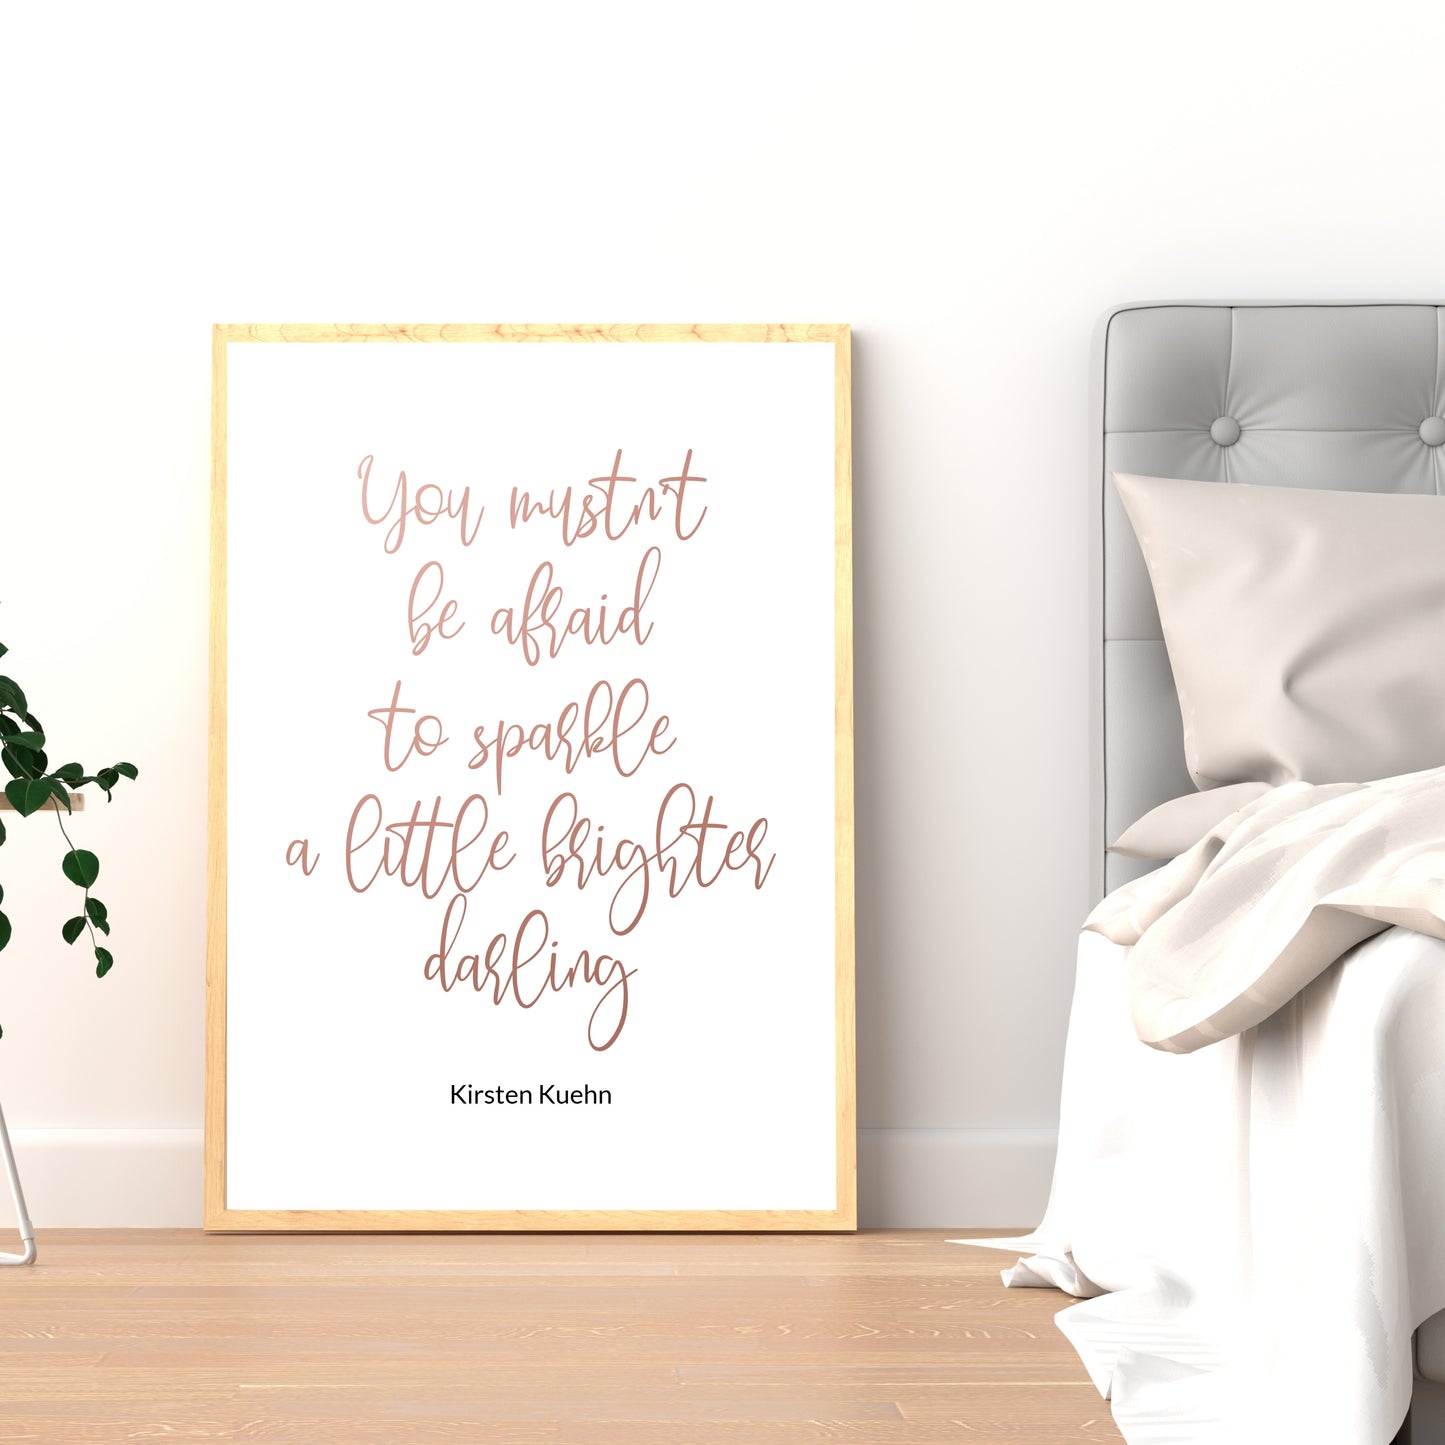 "You Mustn't Be Afraid To Sparkle A Little Brighter Darling," Famous Quote By Kirsten Kuehn In Rose Gold, Printable Art